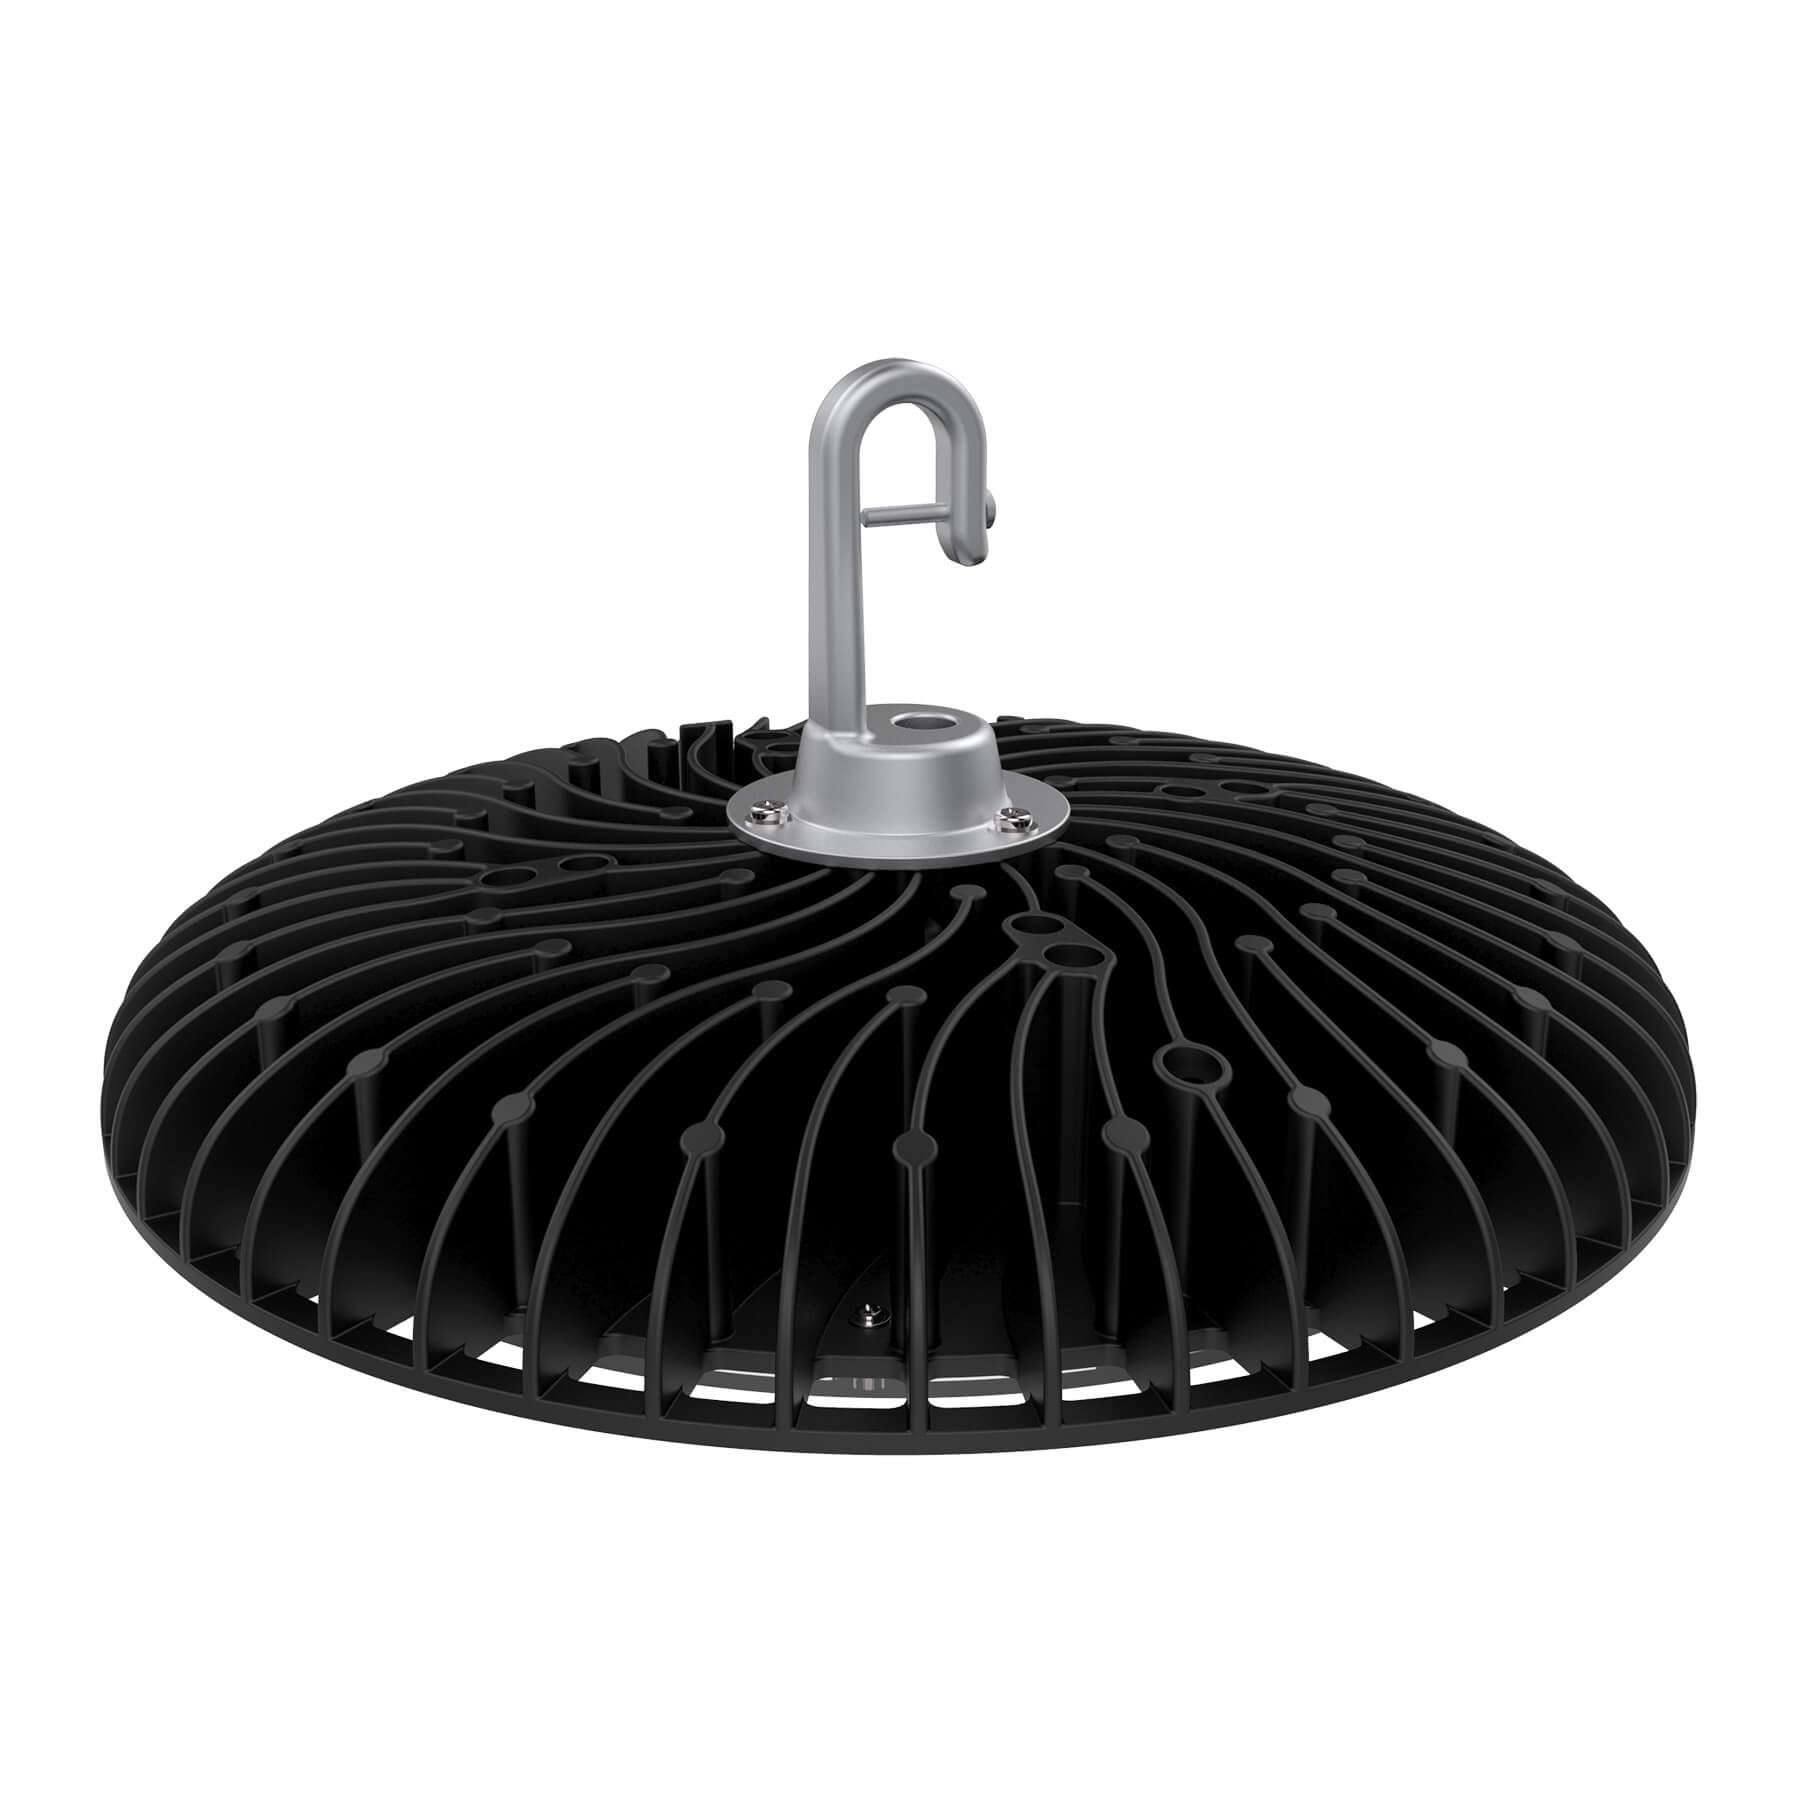 200W LED High Bay Light Fitting, Top View